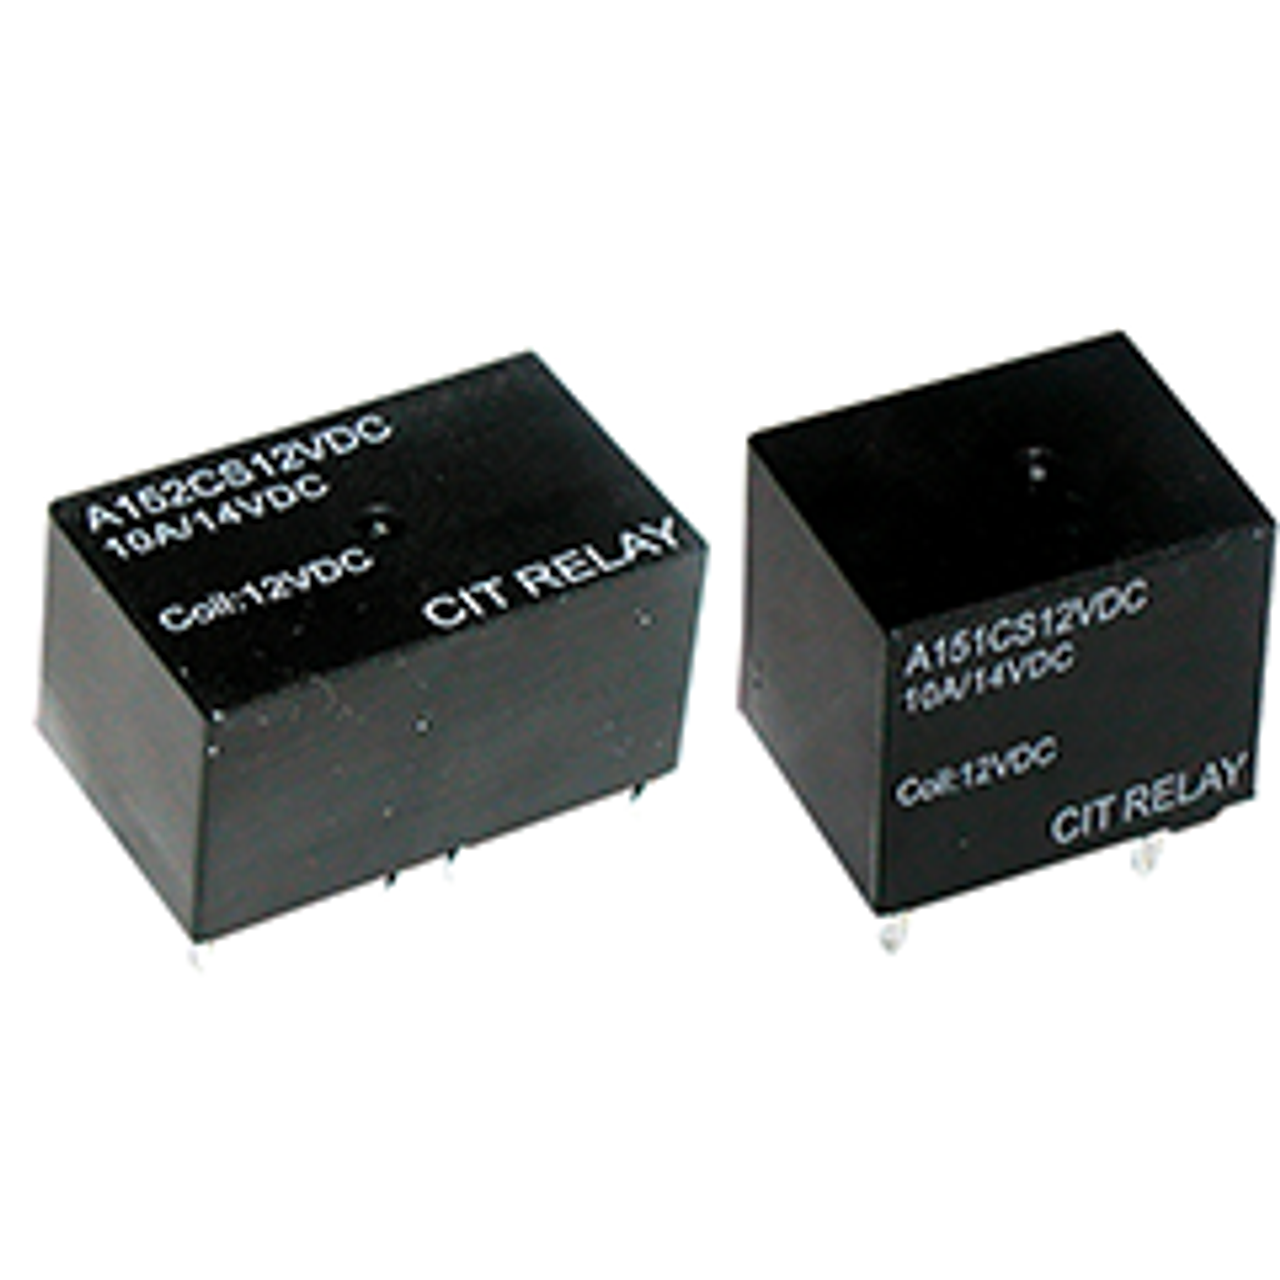 CIT Relay and Switch A151CS12VDC Automotive Relays